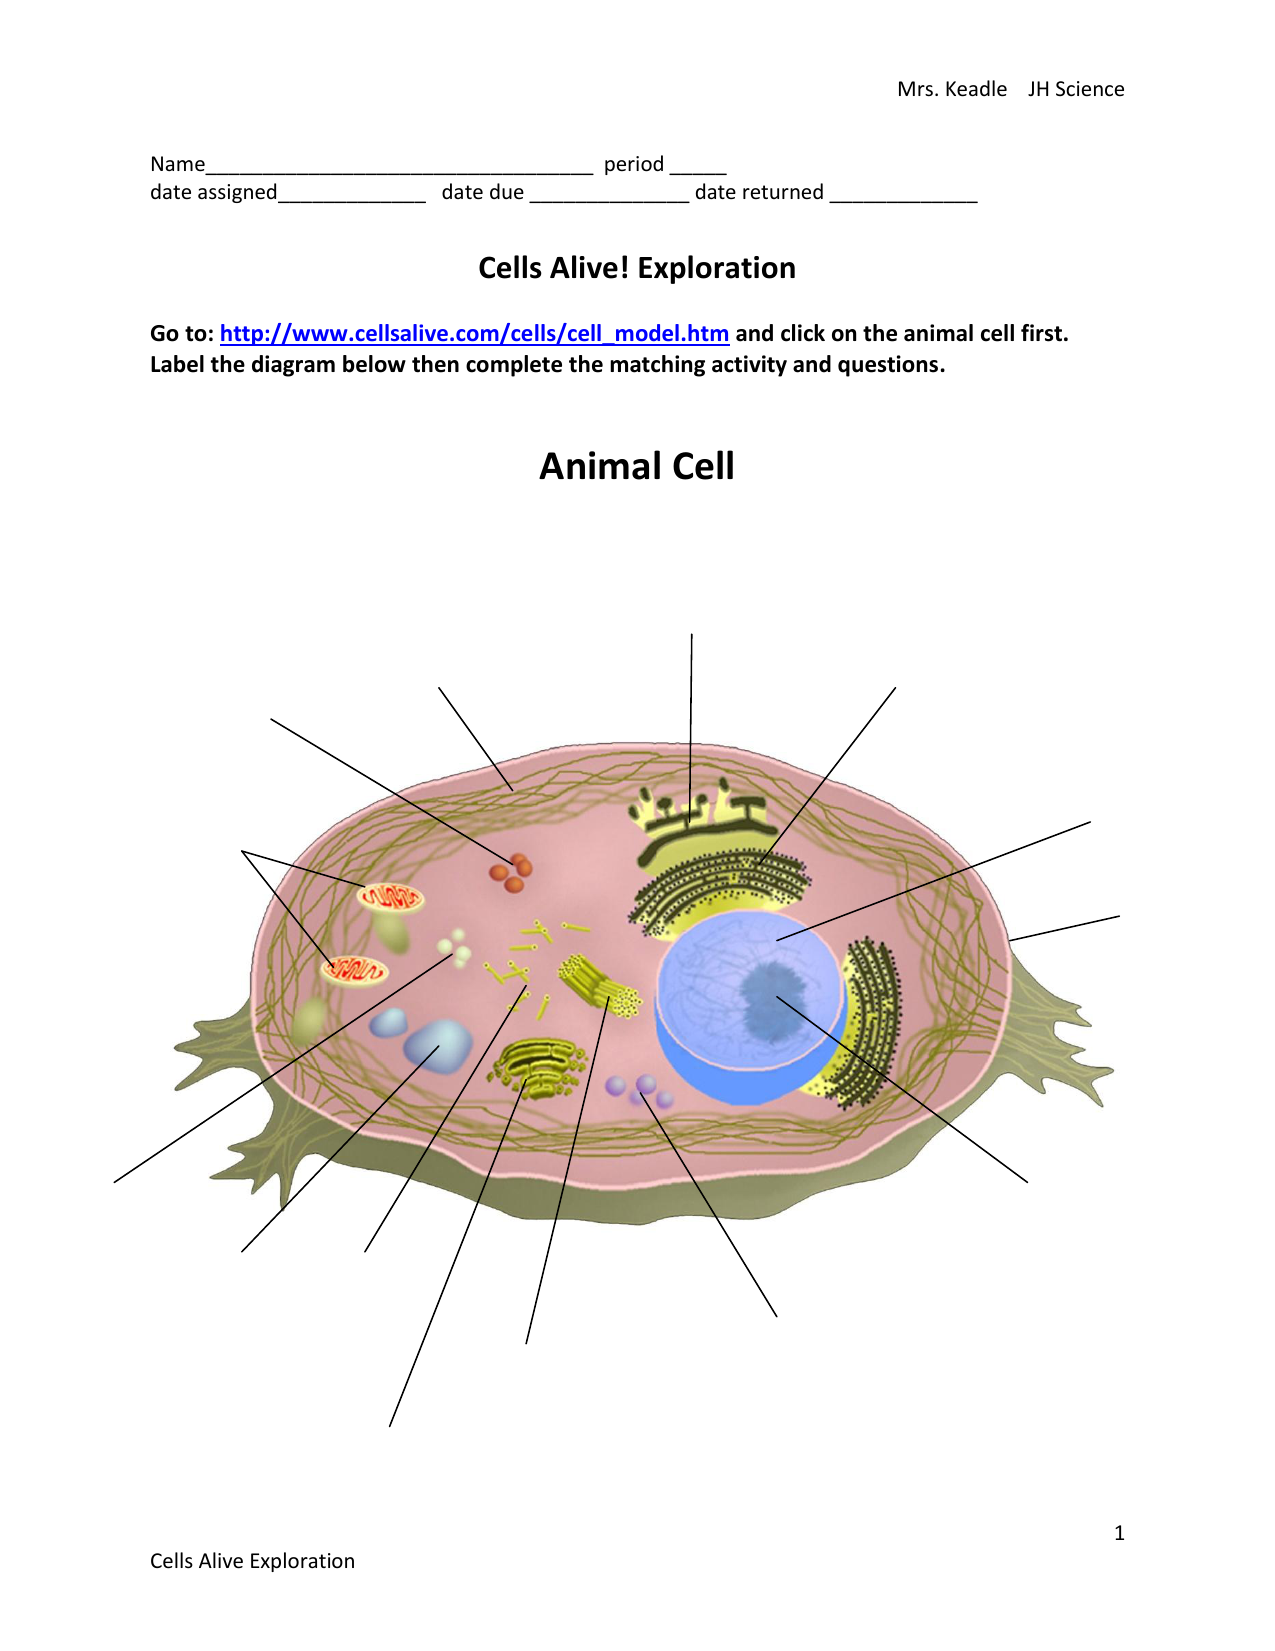 Animal Cell - gwisd.esc20.net For Cells Alive Cell Cycle Worksheet